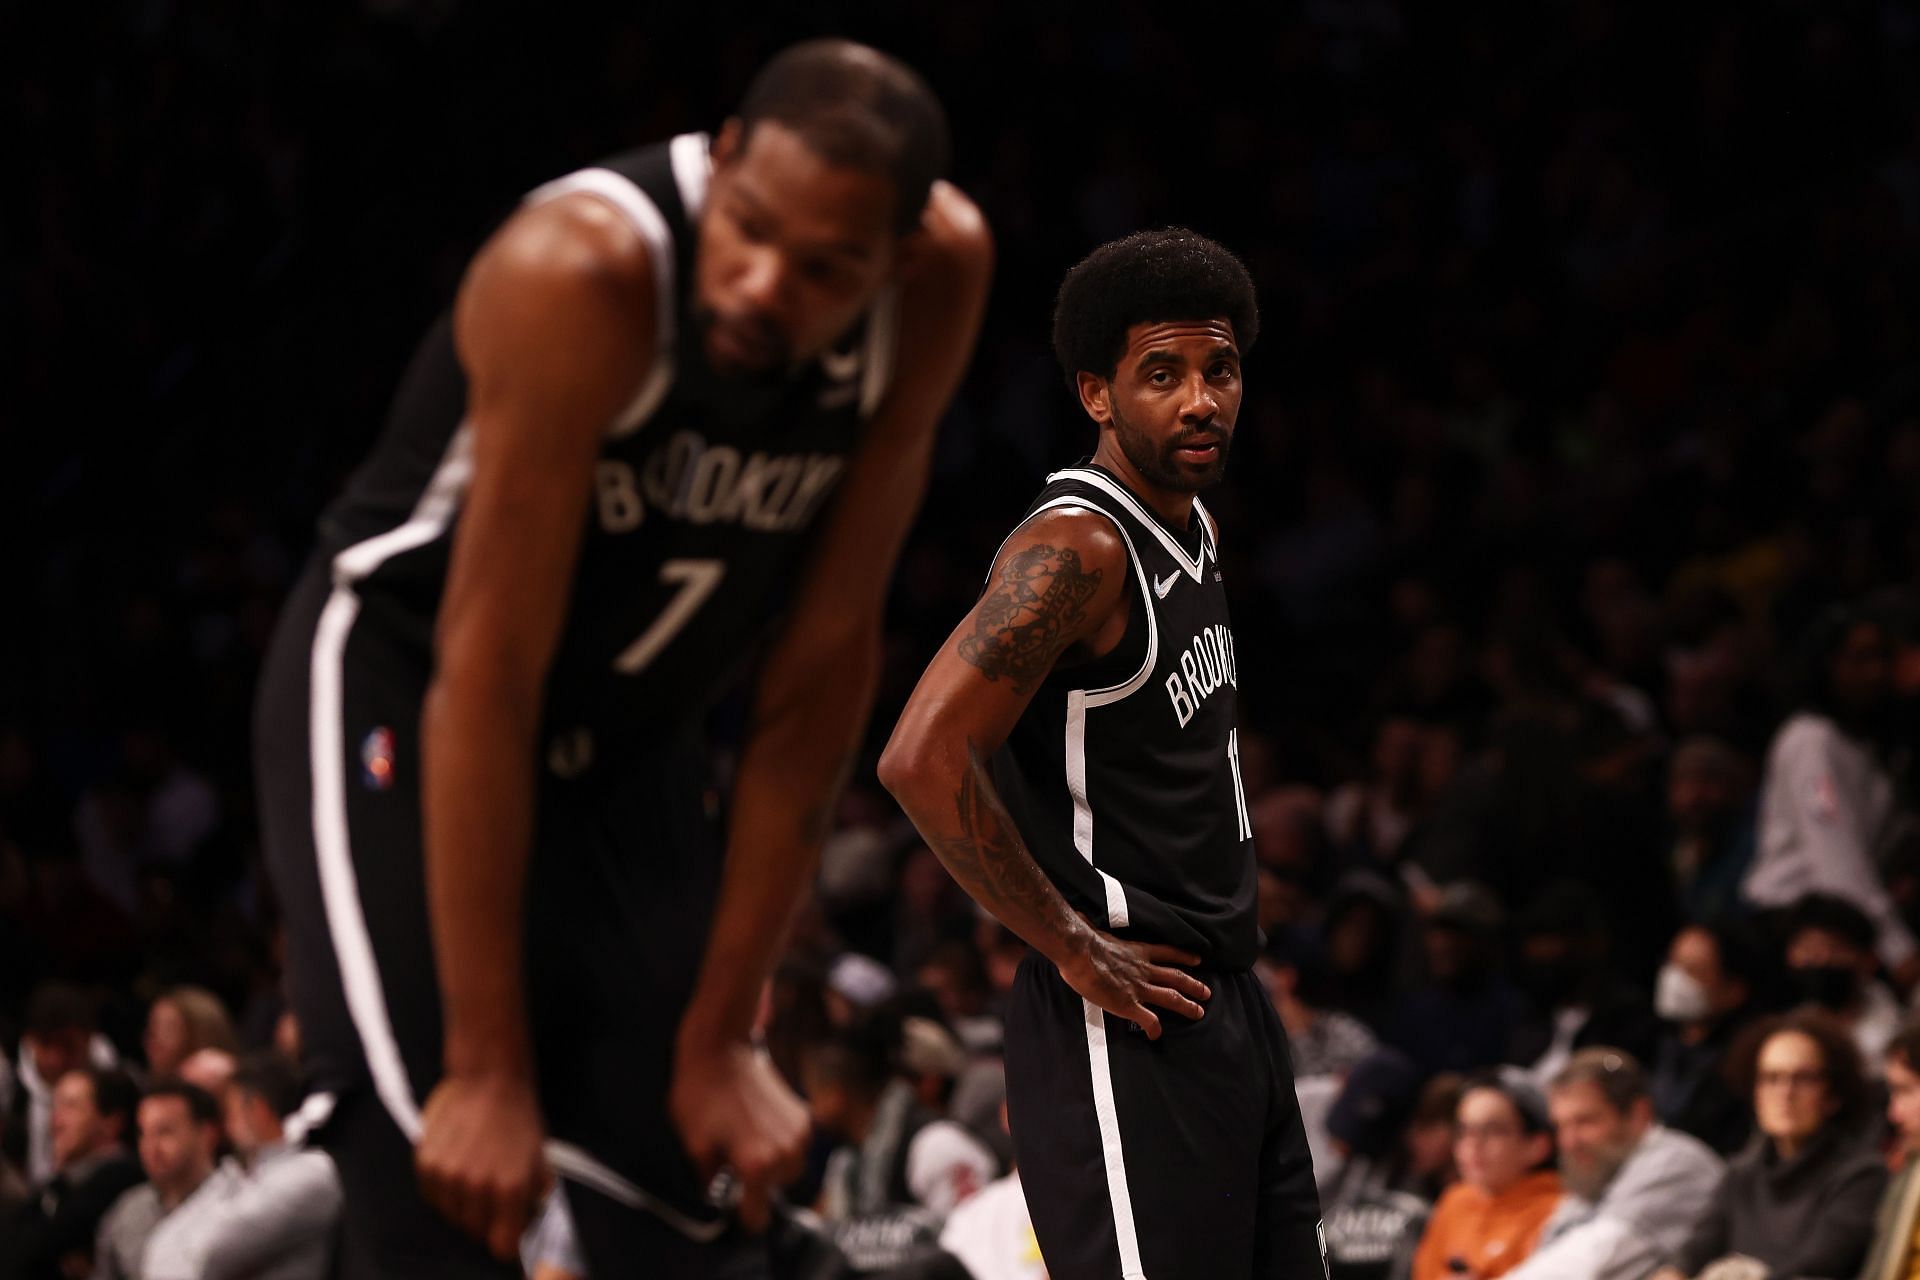 Charlotte Hornets vs. Brooklyn Nets; Kyrie Irving, right, and Kevin Durant back together at home games